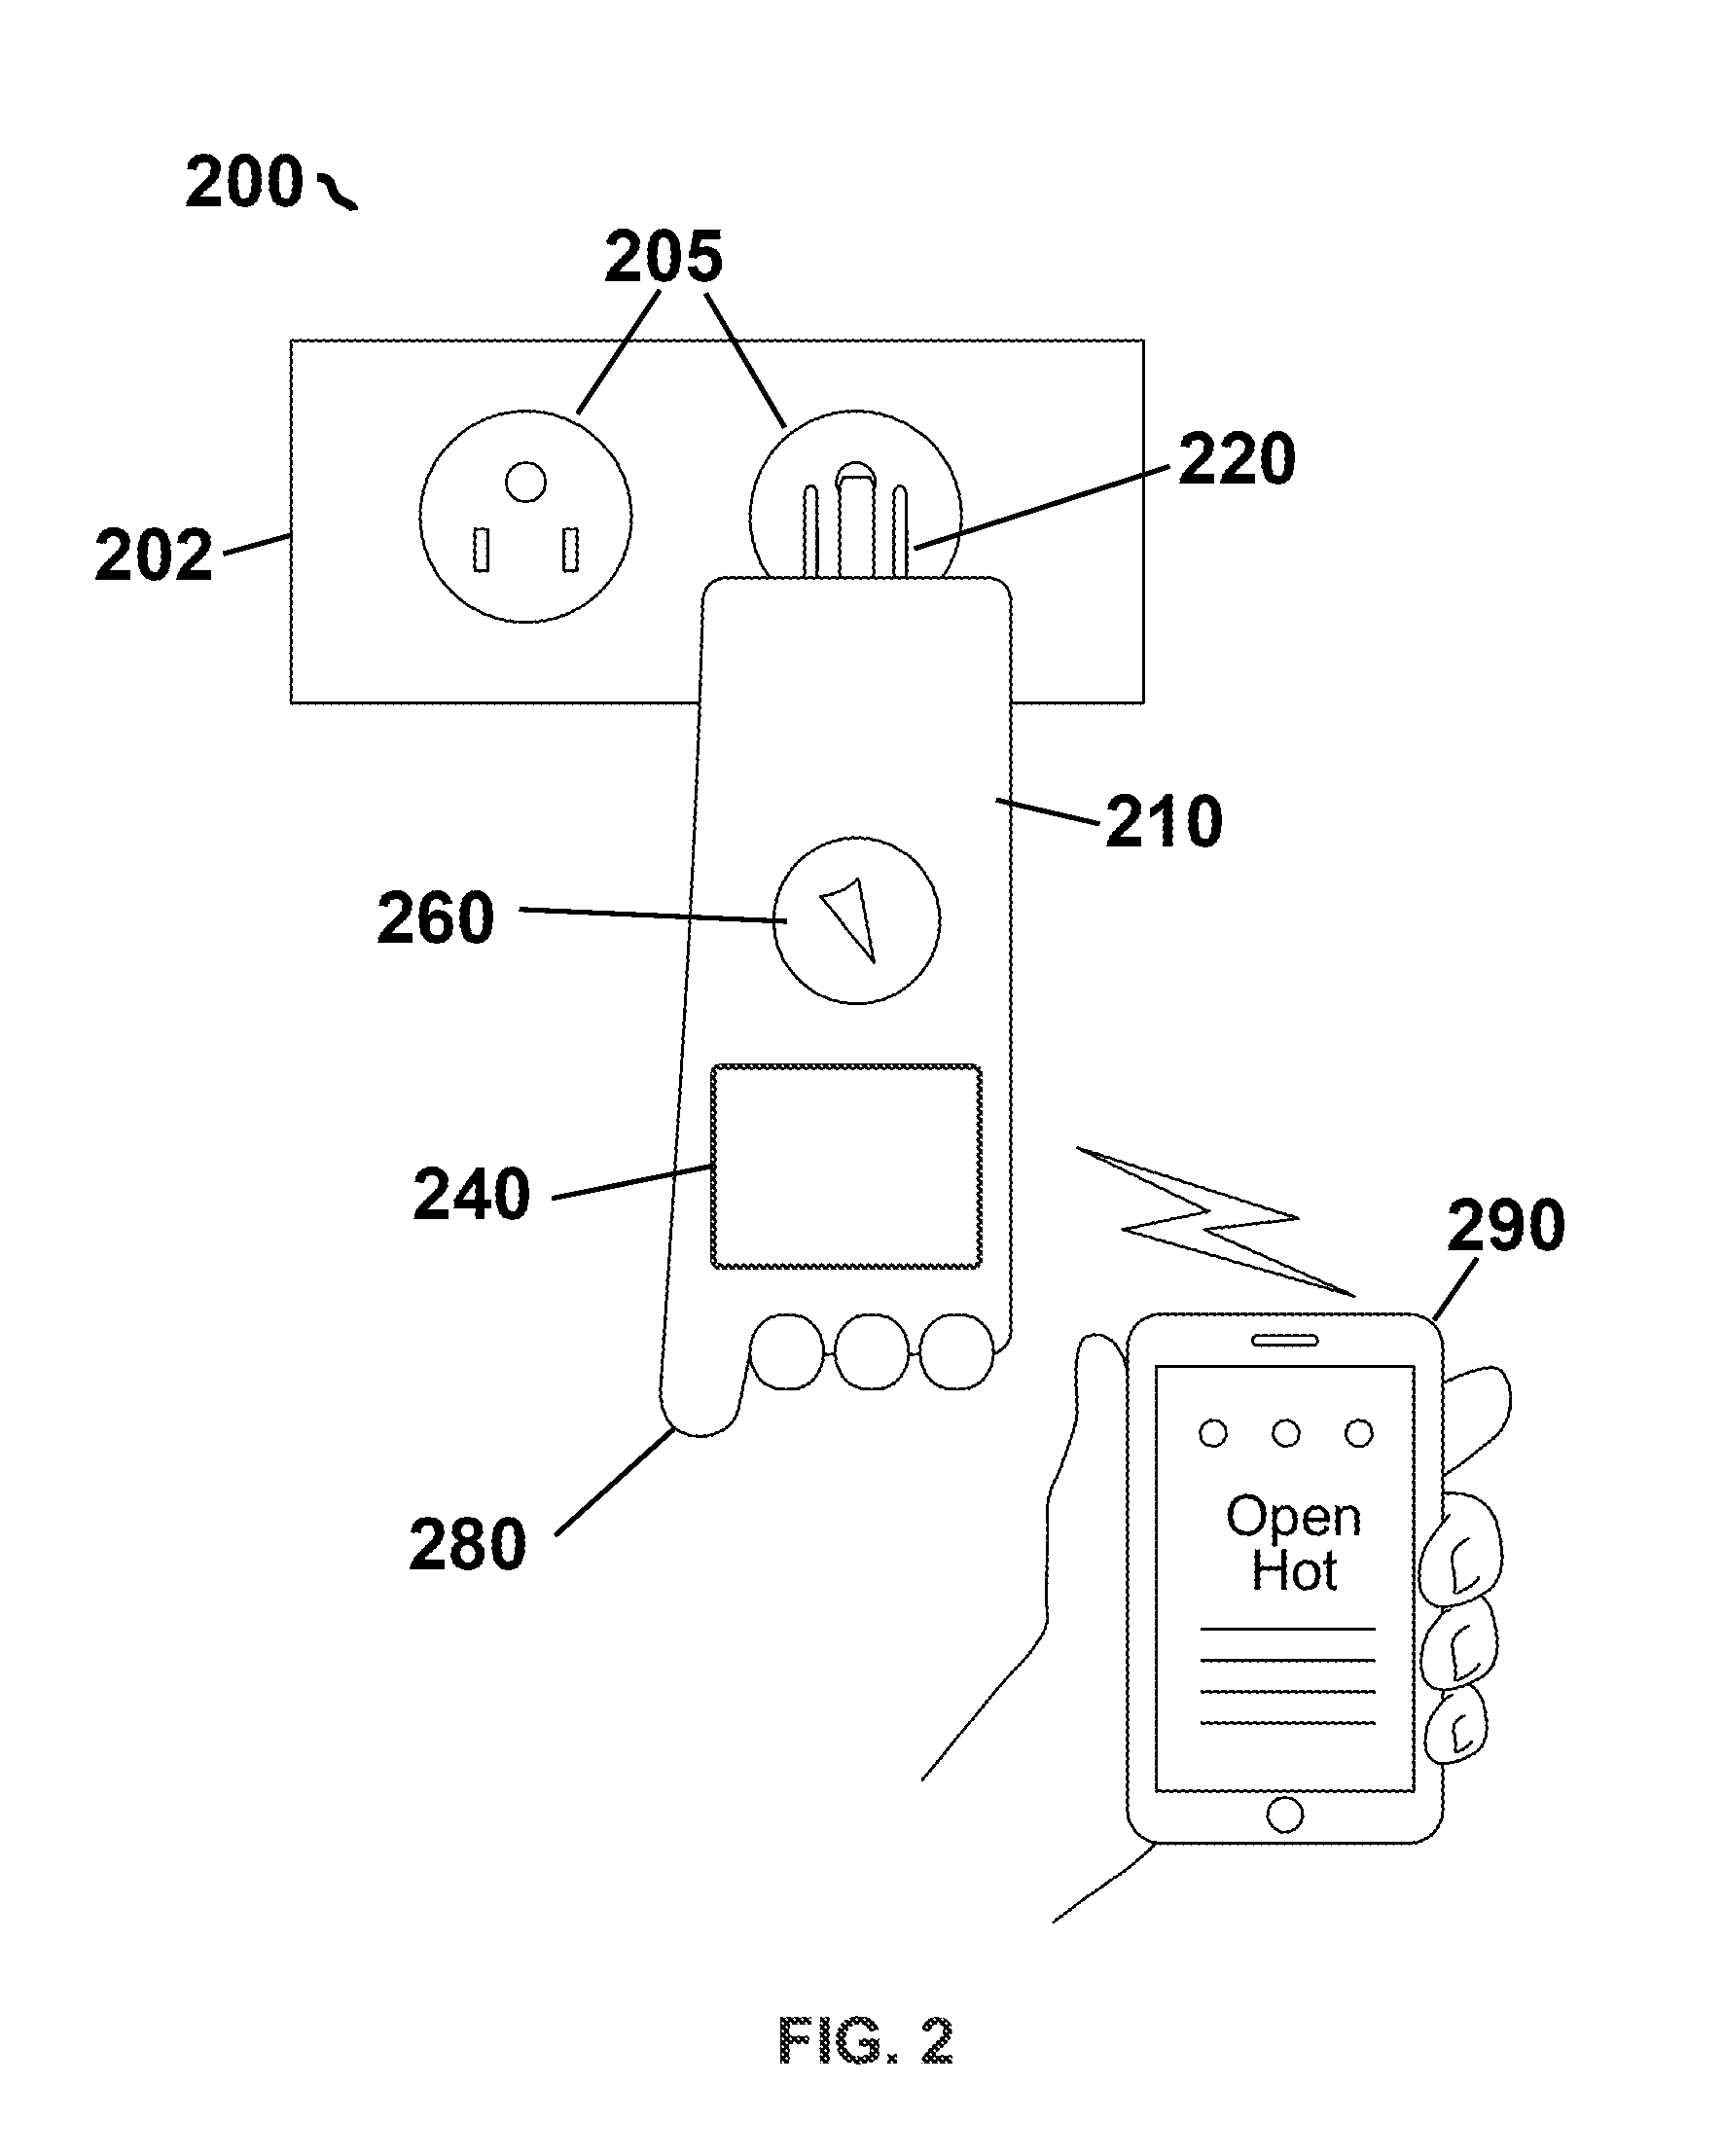 Testing device for electrical safety using wireless communication